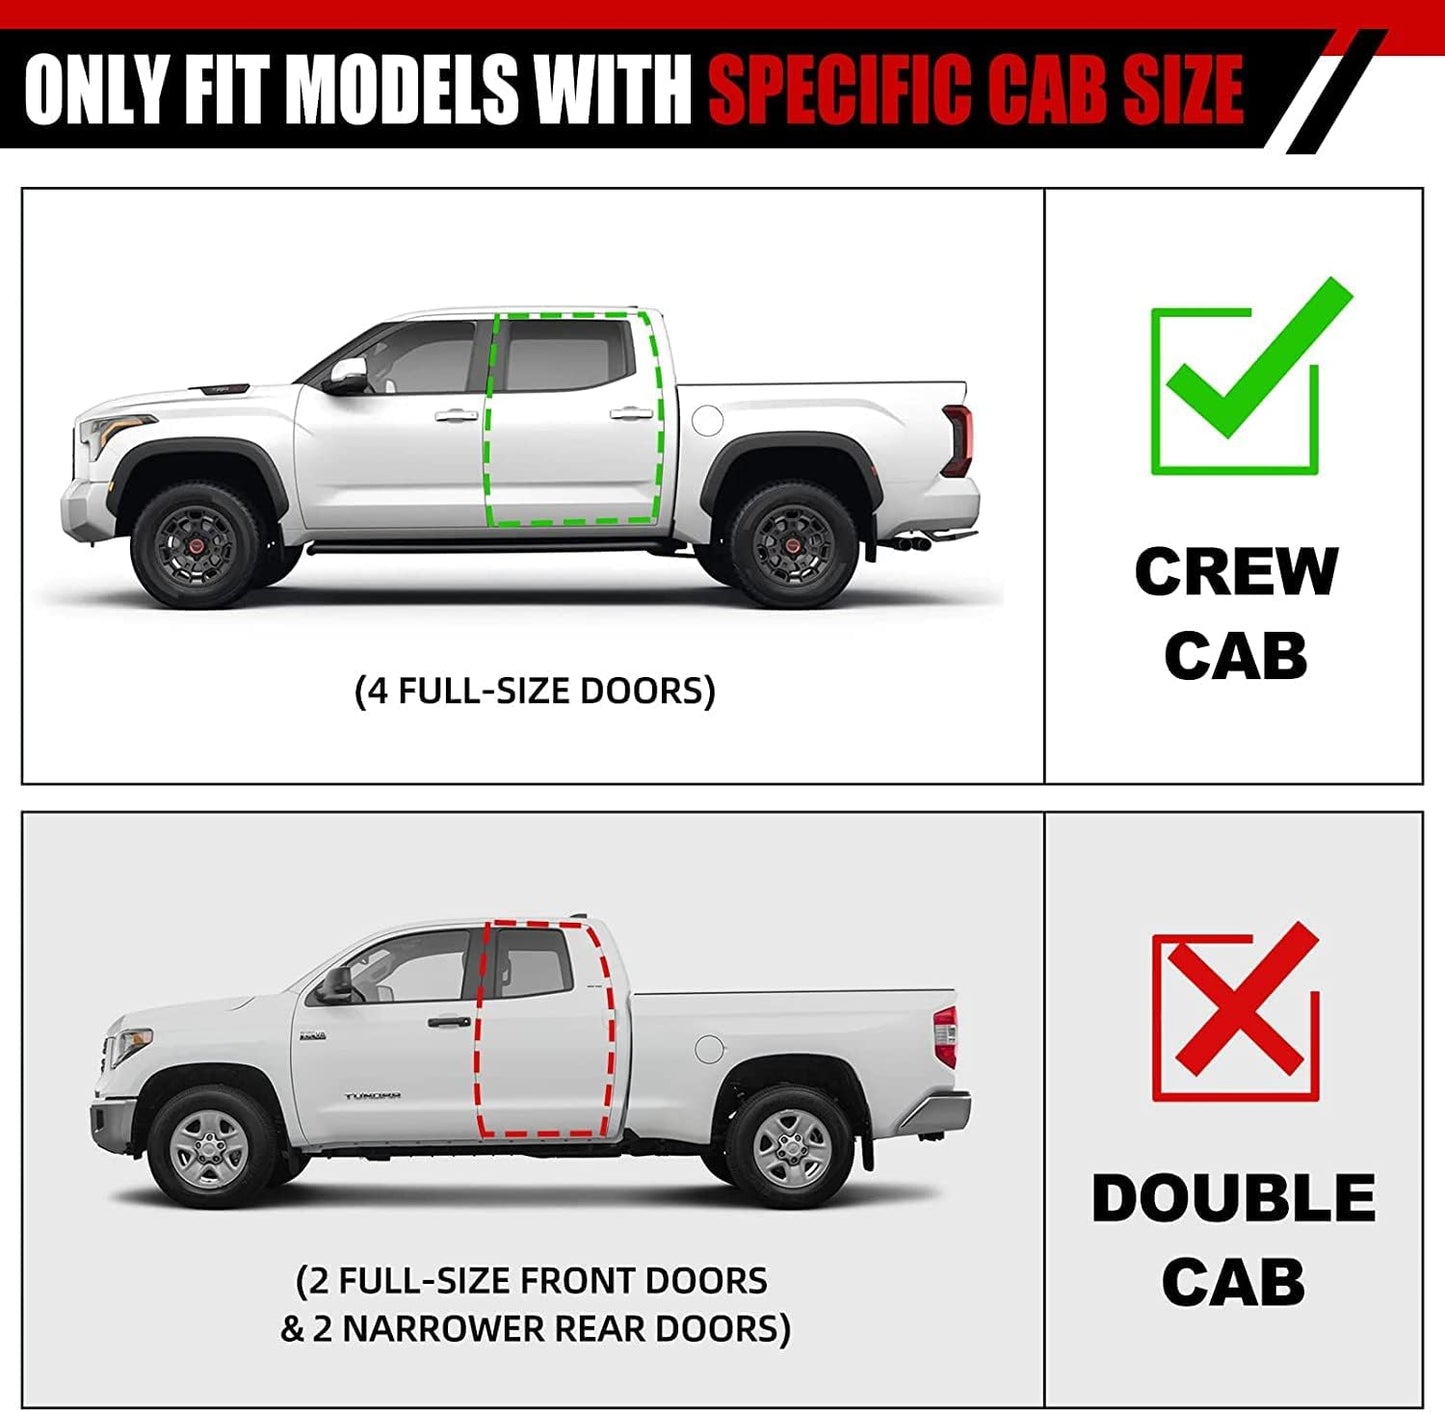 Running Boards Compatible with 2005-2024 Nissan Frontier Crew Cab with 4 Full Size Doors H6 Style.- COMNOVA AUTOPART